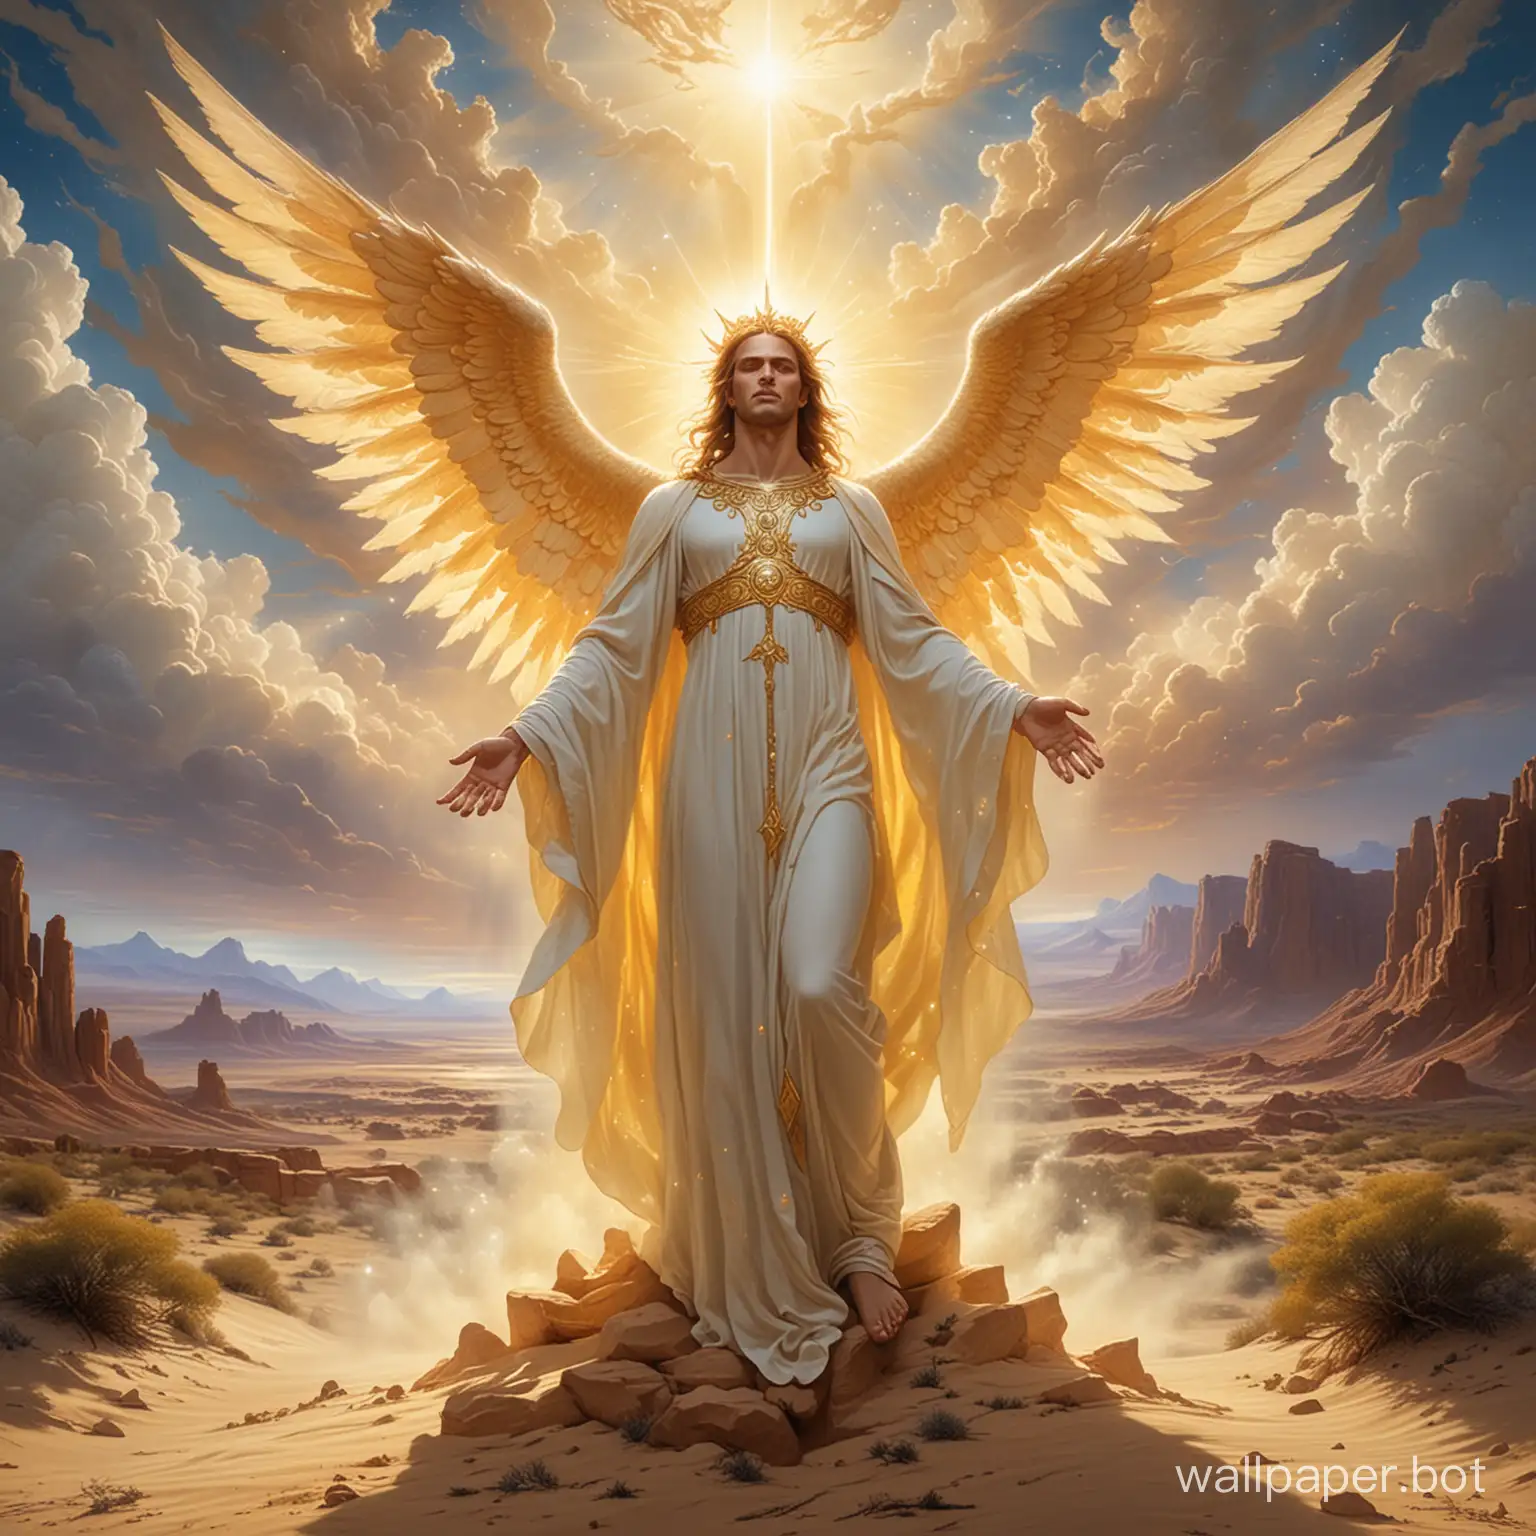 In the vast expanse of the desert's endless sand dunes, a misty golden aura rises from the earth, hinting at a celestial message. Emerging from the heart of this luminous nebula is the majestic Archangel Gabriel. Clad in a resplendent robe of white and gold, shimmering under the divine light filtering through the clouds, Gabriel's presence commands attention.
His mighty wings exude a radiant purity and power, casting a dazzling sheen. Gabriel's countenance, sculpted with divine grace, reflects wisdom, tenderness, and unwavering strength. In his hands, he cradles a message of peace and justice, a beacon of hope in the desolate landscape.
On the opposing end of the desert, lurking in the shadows of a forsaken ruin, a grotesque demon bides its time. With fiery eyes and menacing claws, the demon exudes terror. At the sight of Gabriel, fear grips the demon, its body convulsing as it frantically seeks an escape from the impending confrontation.
As if in response to Gabriel's celestial presence, the sun bursts throu